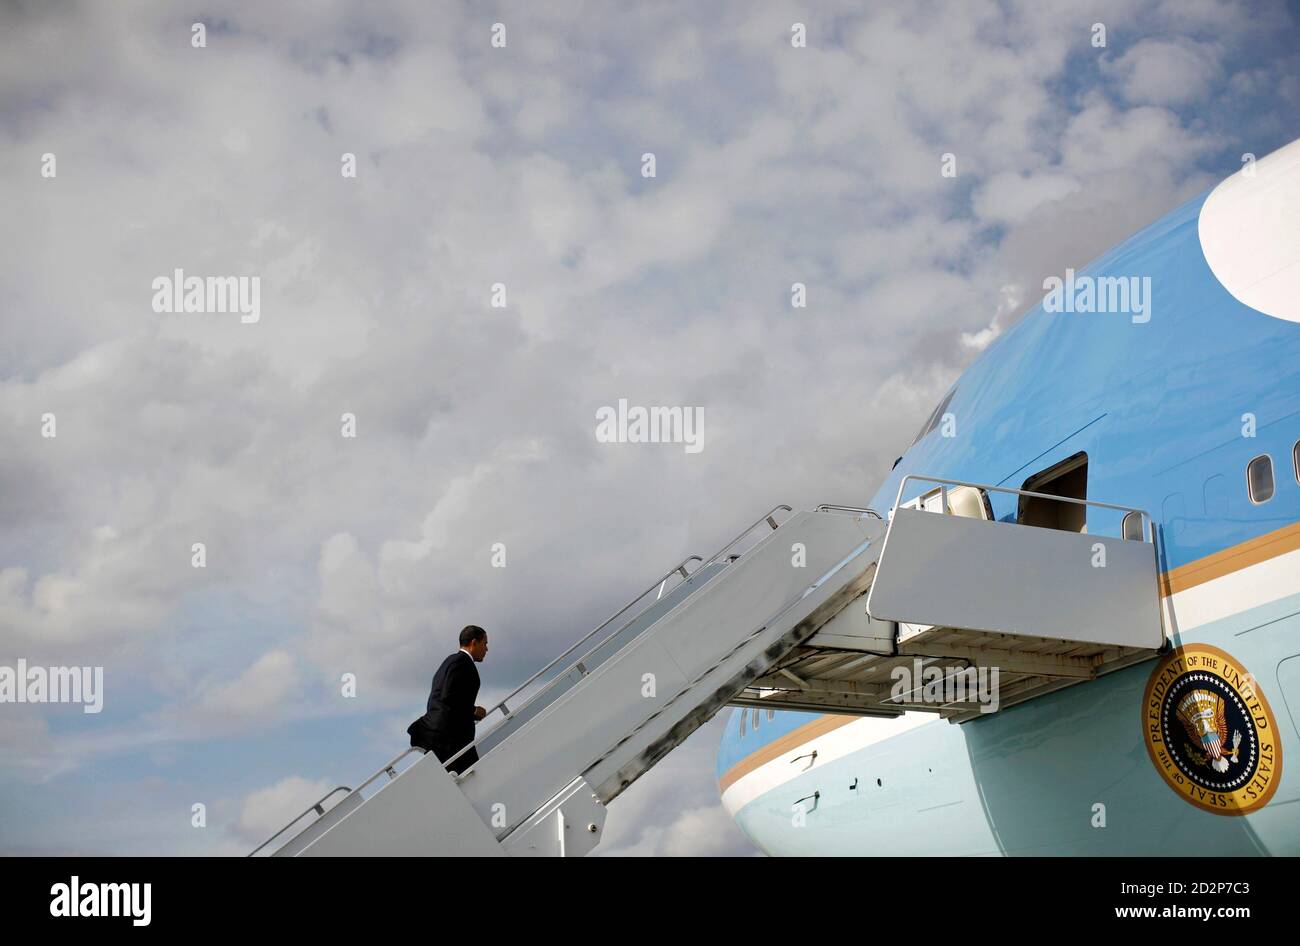 U.S. President Barack Obama boards Air Force One at Cherry Point Marine Corps Air Station (MCAS), North Carolina, February 27, 2009.    REUTERS/Jim Young    (UNITED STATES) Stock Photo